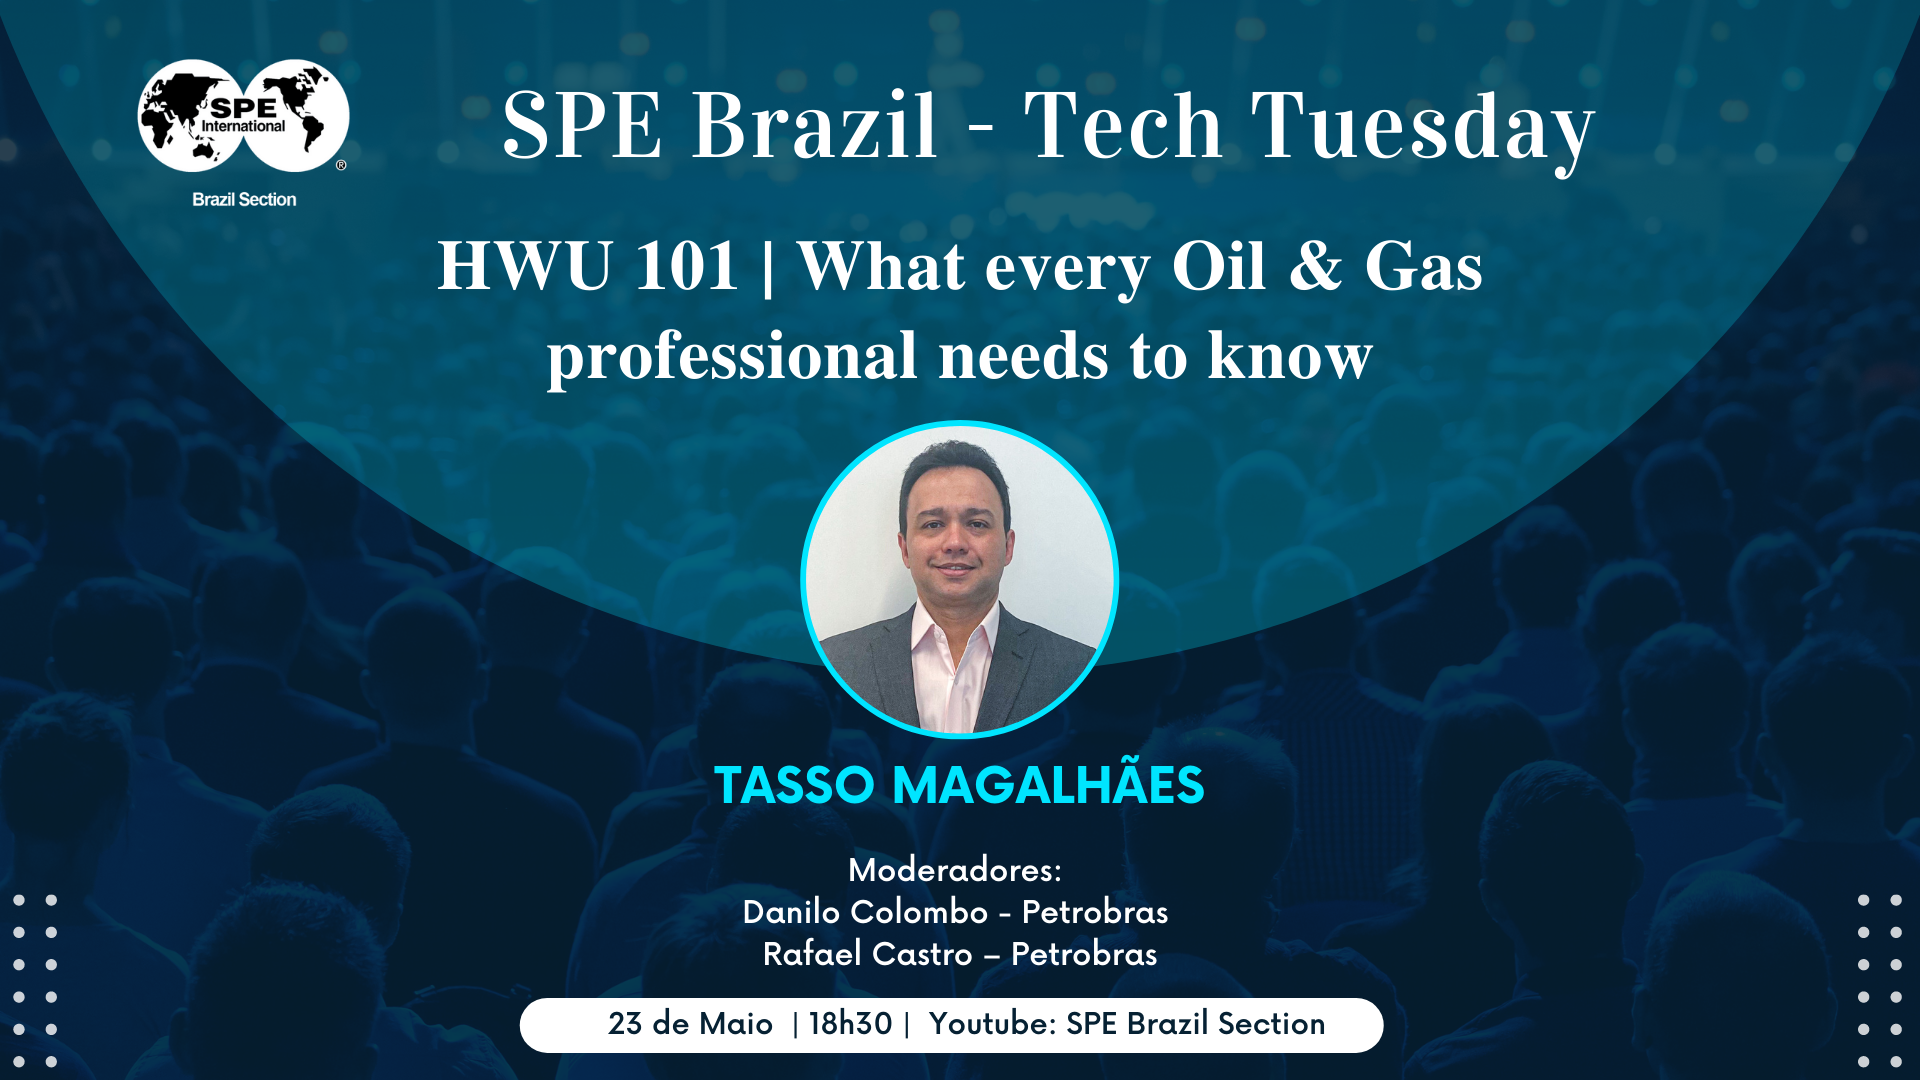 SPE Brazil Tech Tuesday – HWU 101 | What every Oil & Gas professional needs to know